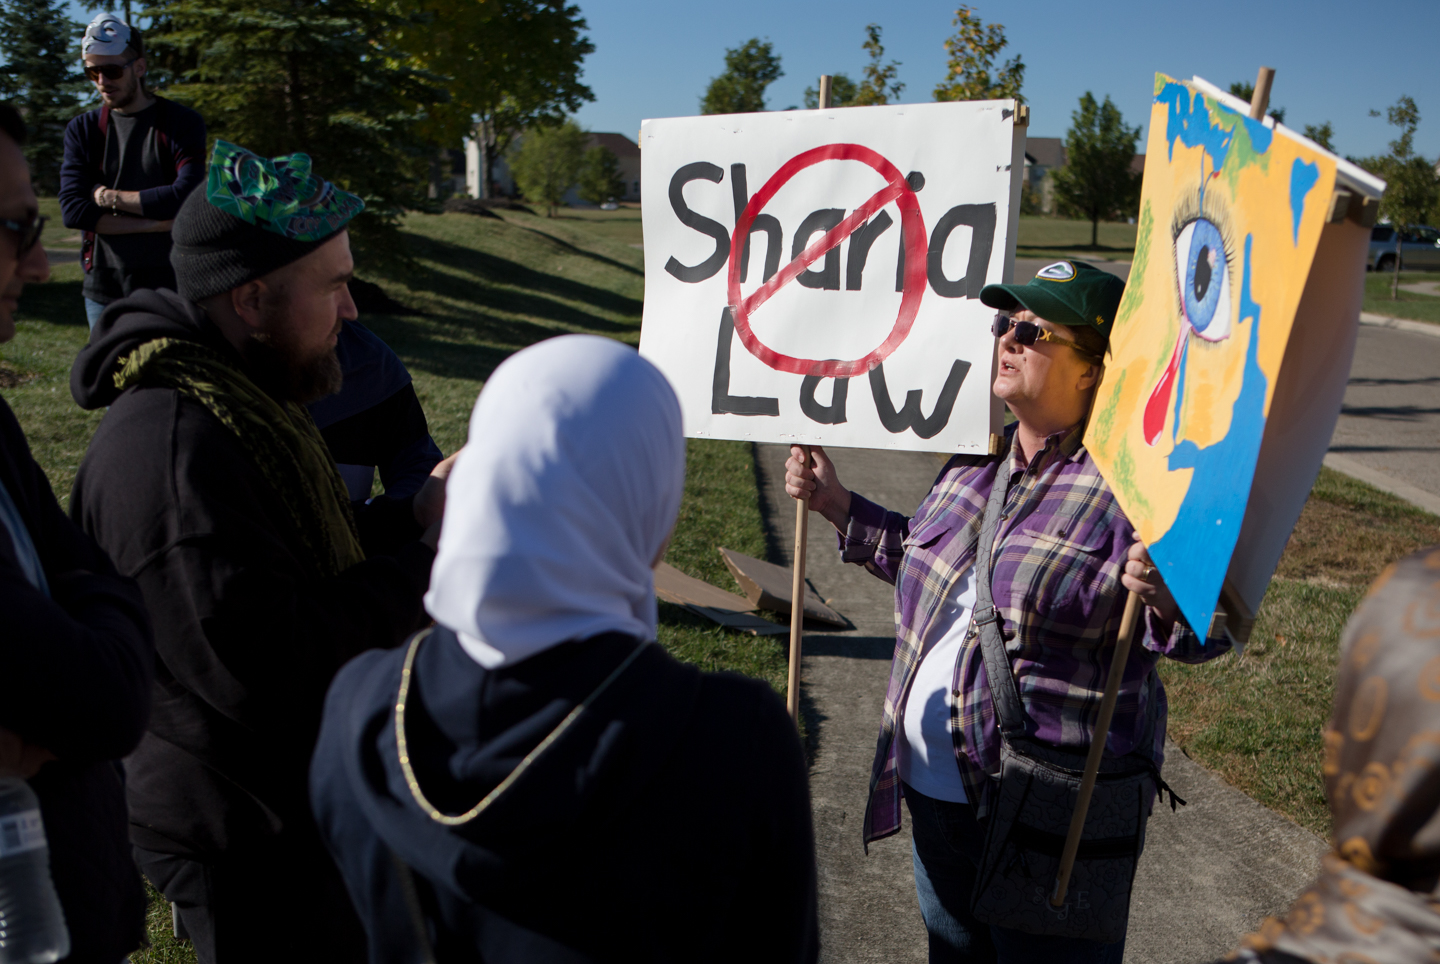 woman protests against "Sharia Law" outside Islamic center